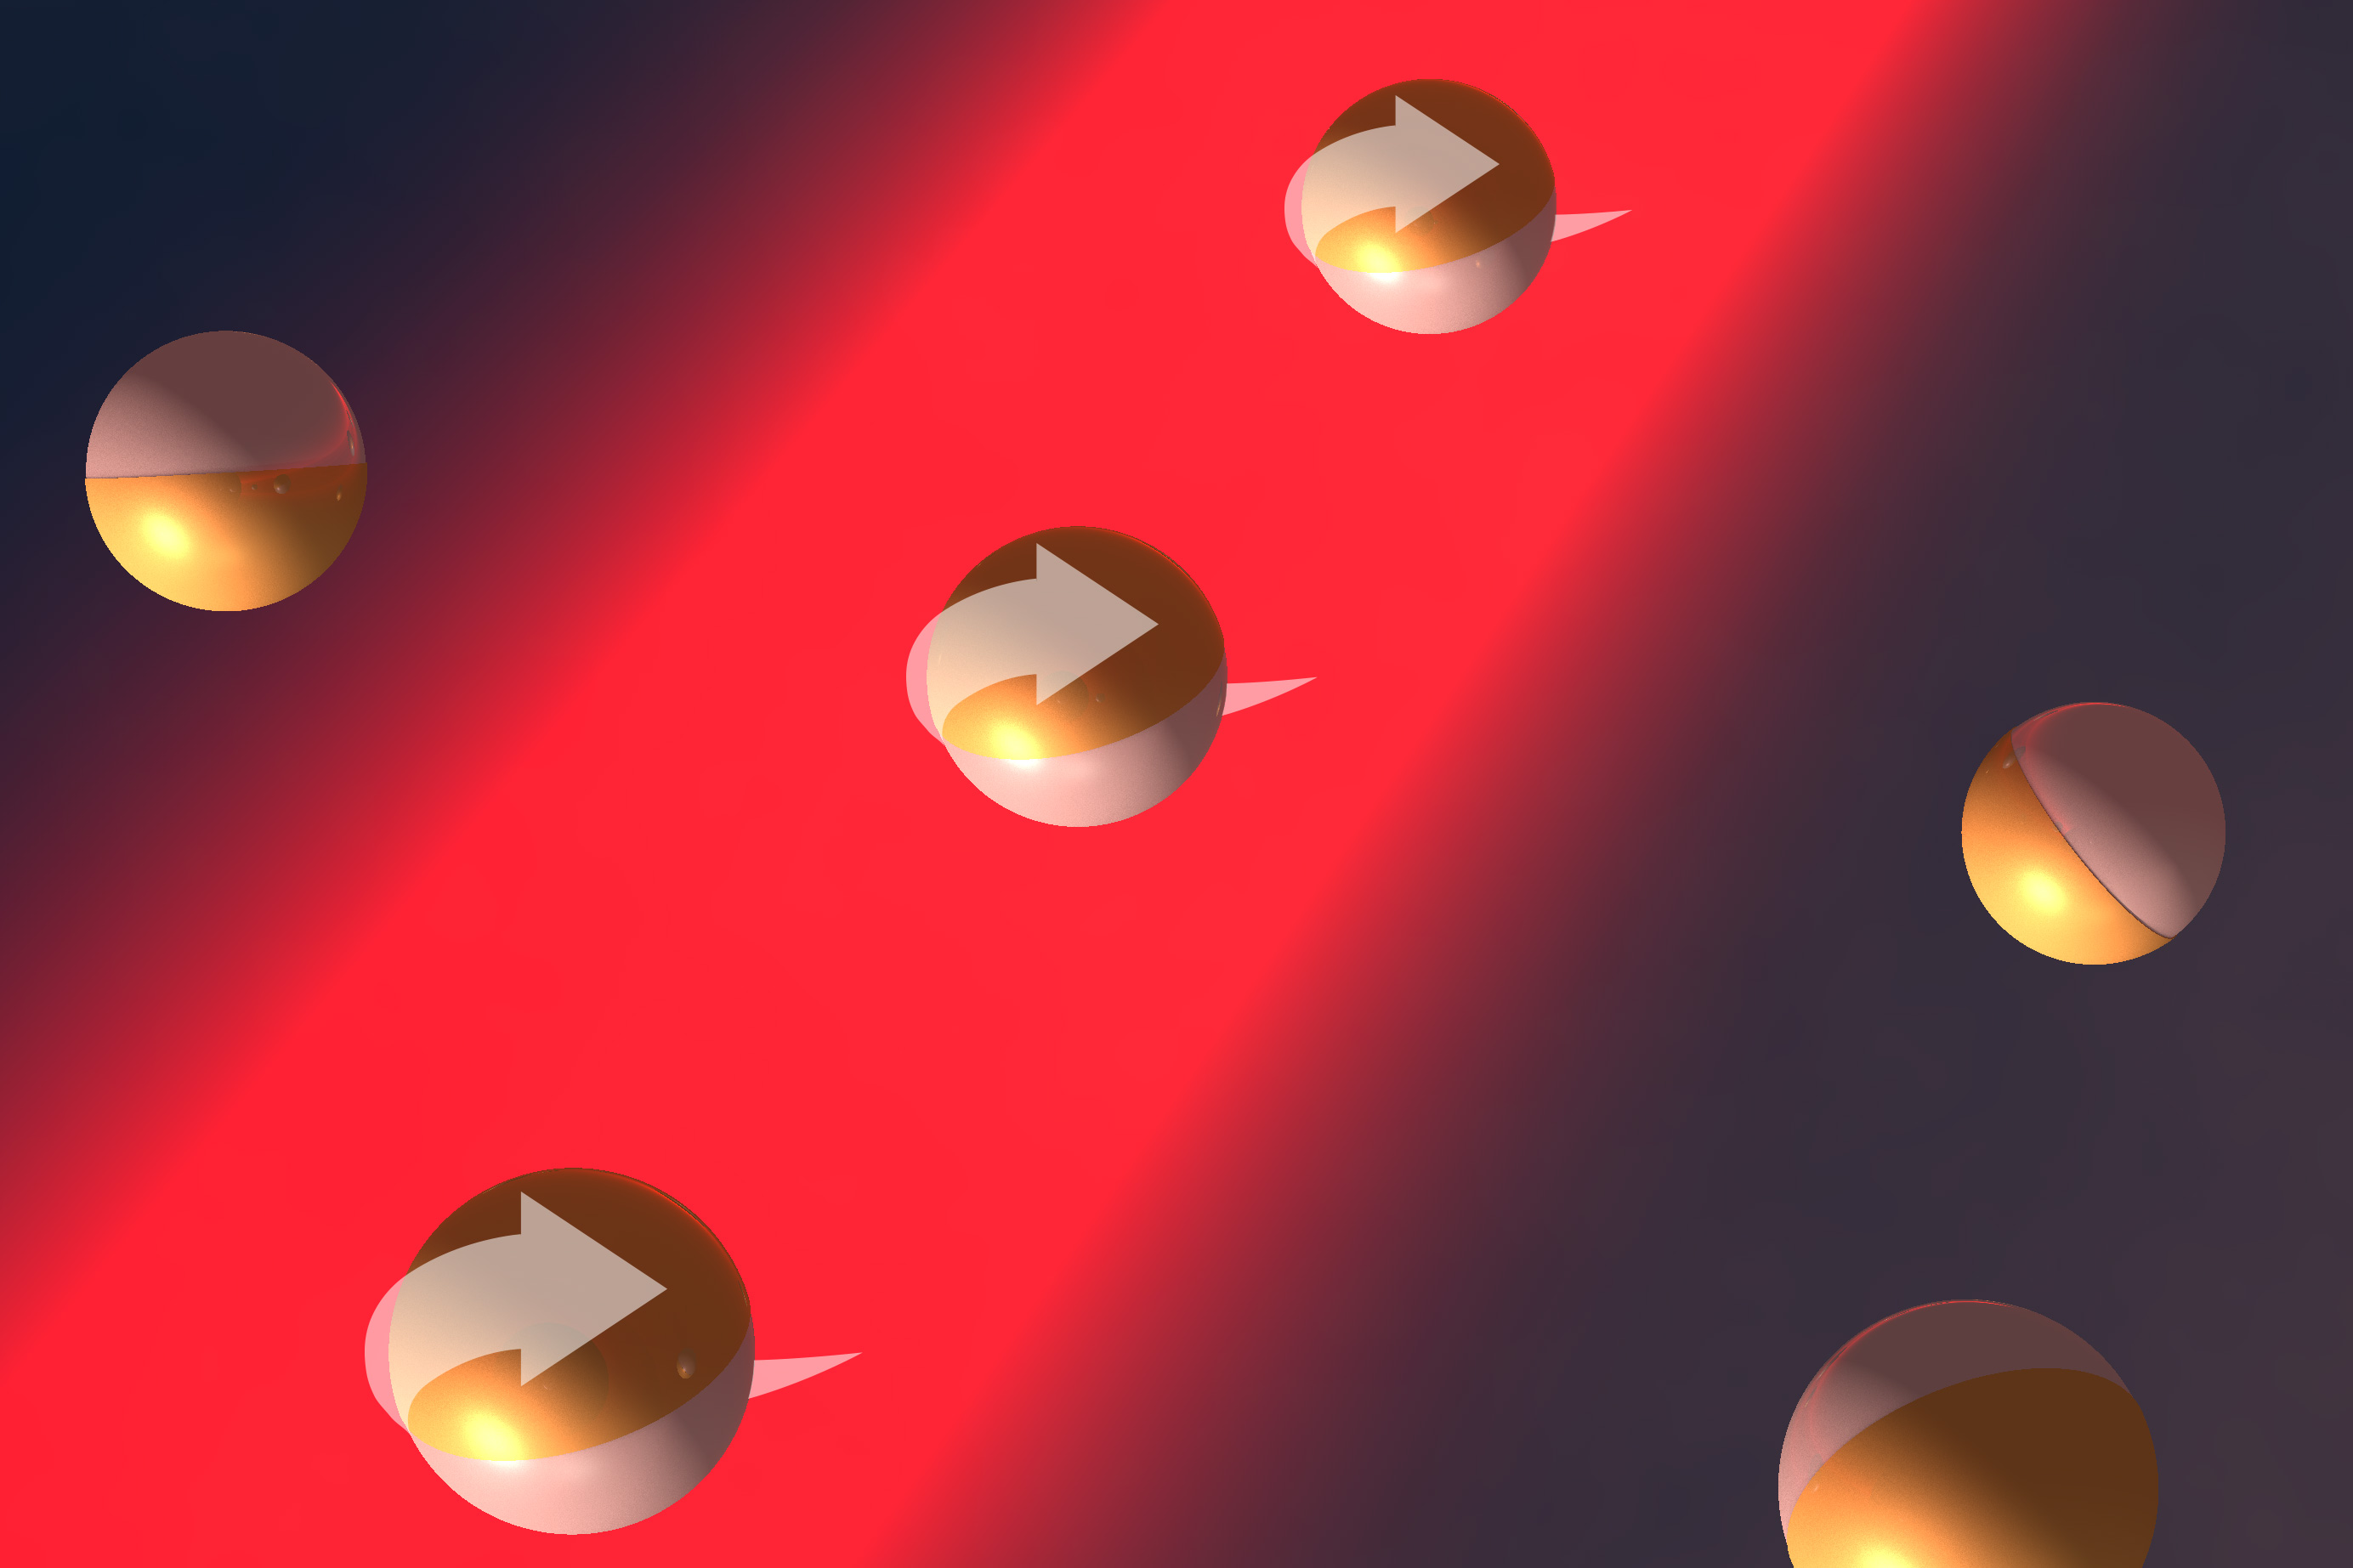 Tiny “motors” are driven by light